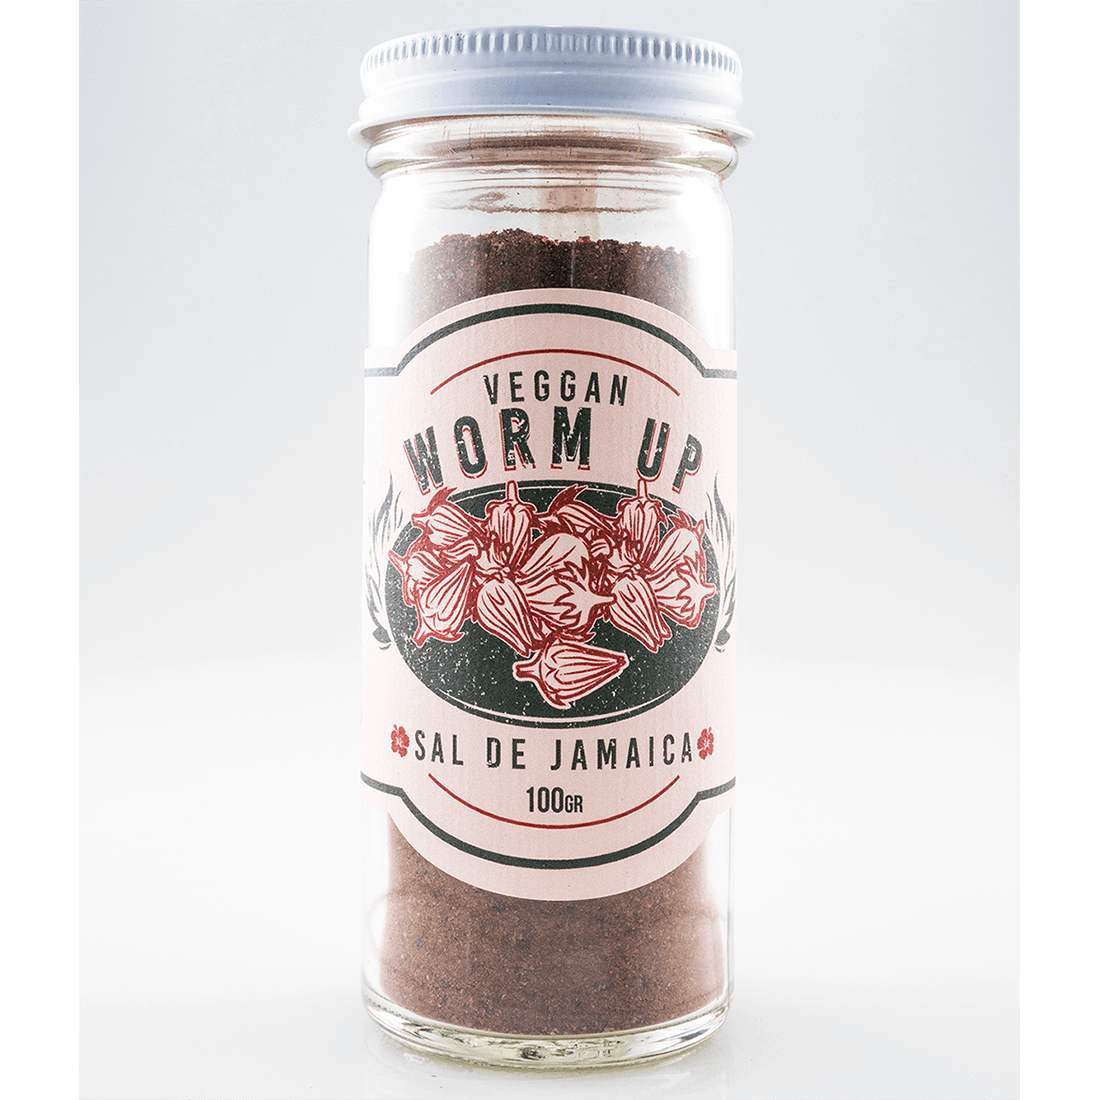 Worm Up brings you the ancient and traditional techniques of how flavour infused salts have been made for centuries. All made by hand, over an open fire by the female communes who pass on these traditions of Mexico’s regional areas.